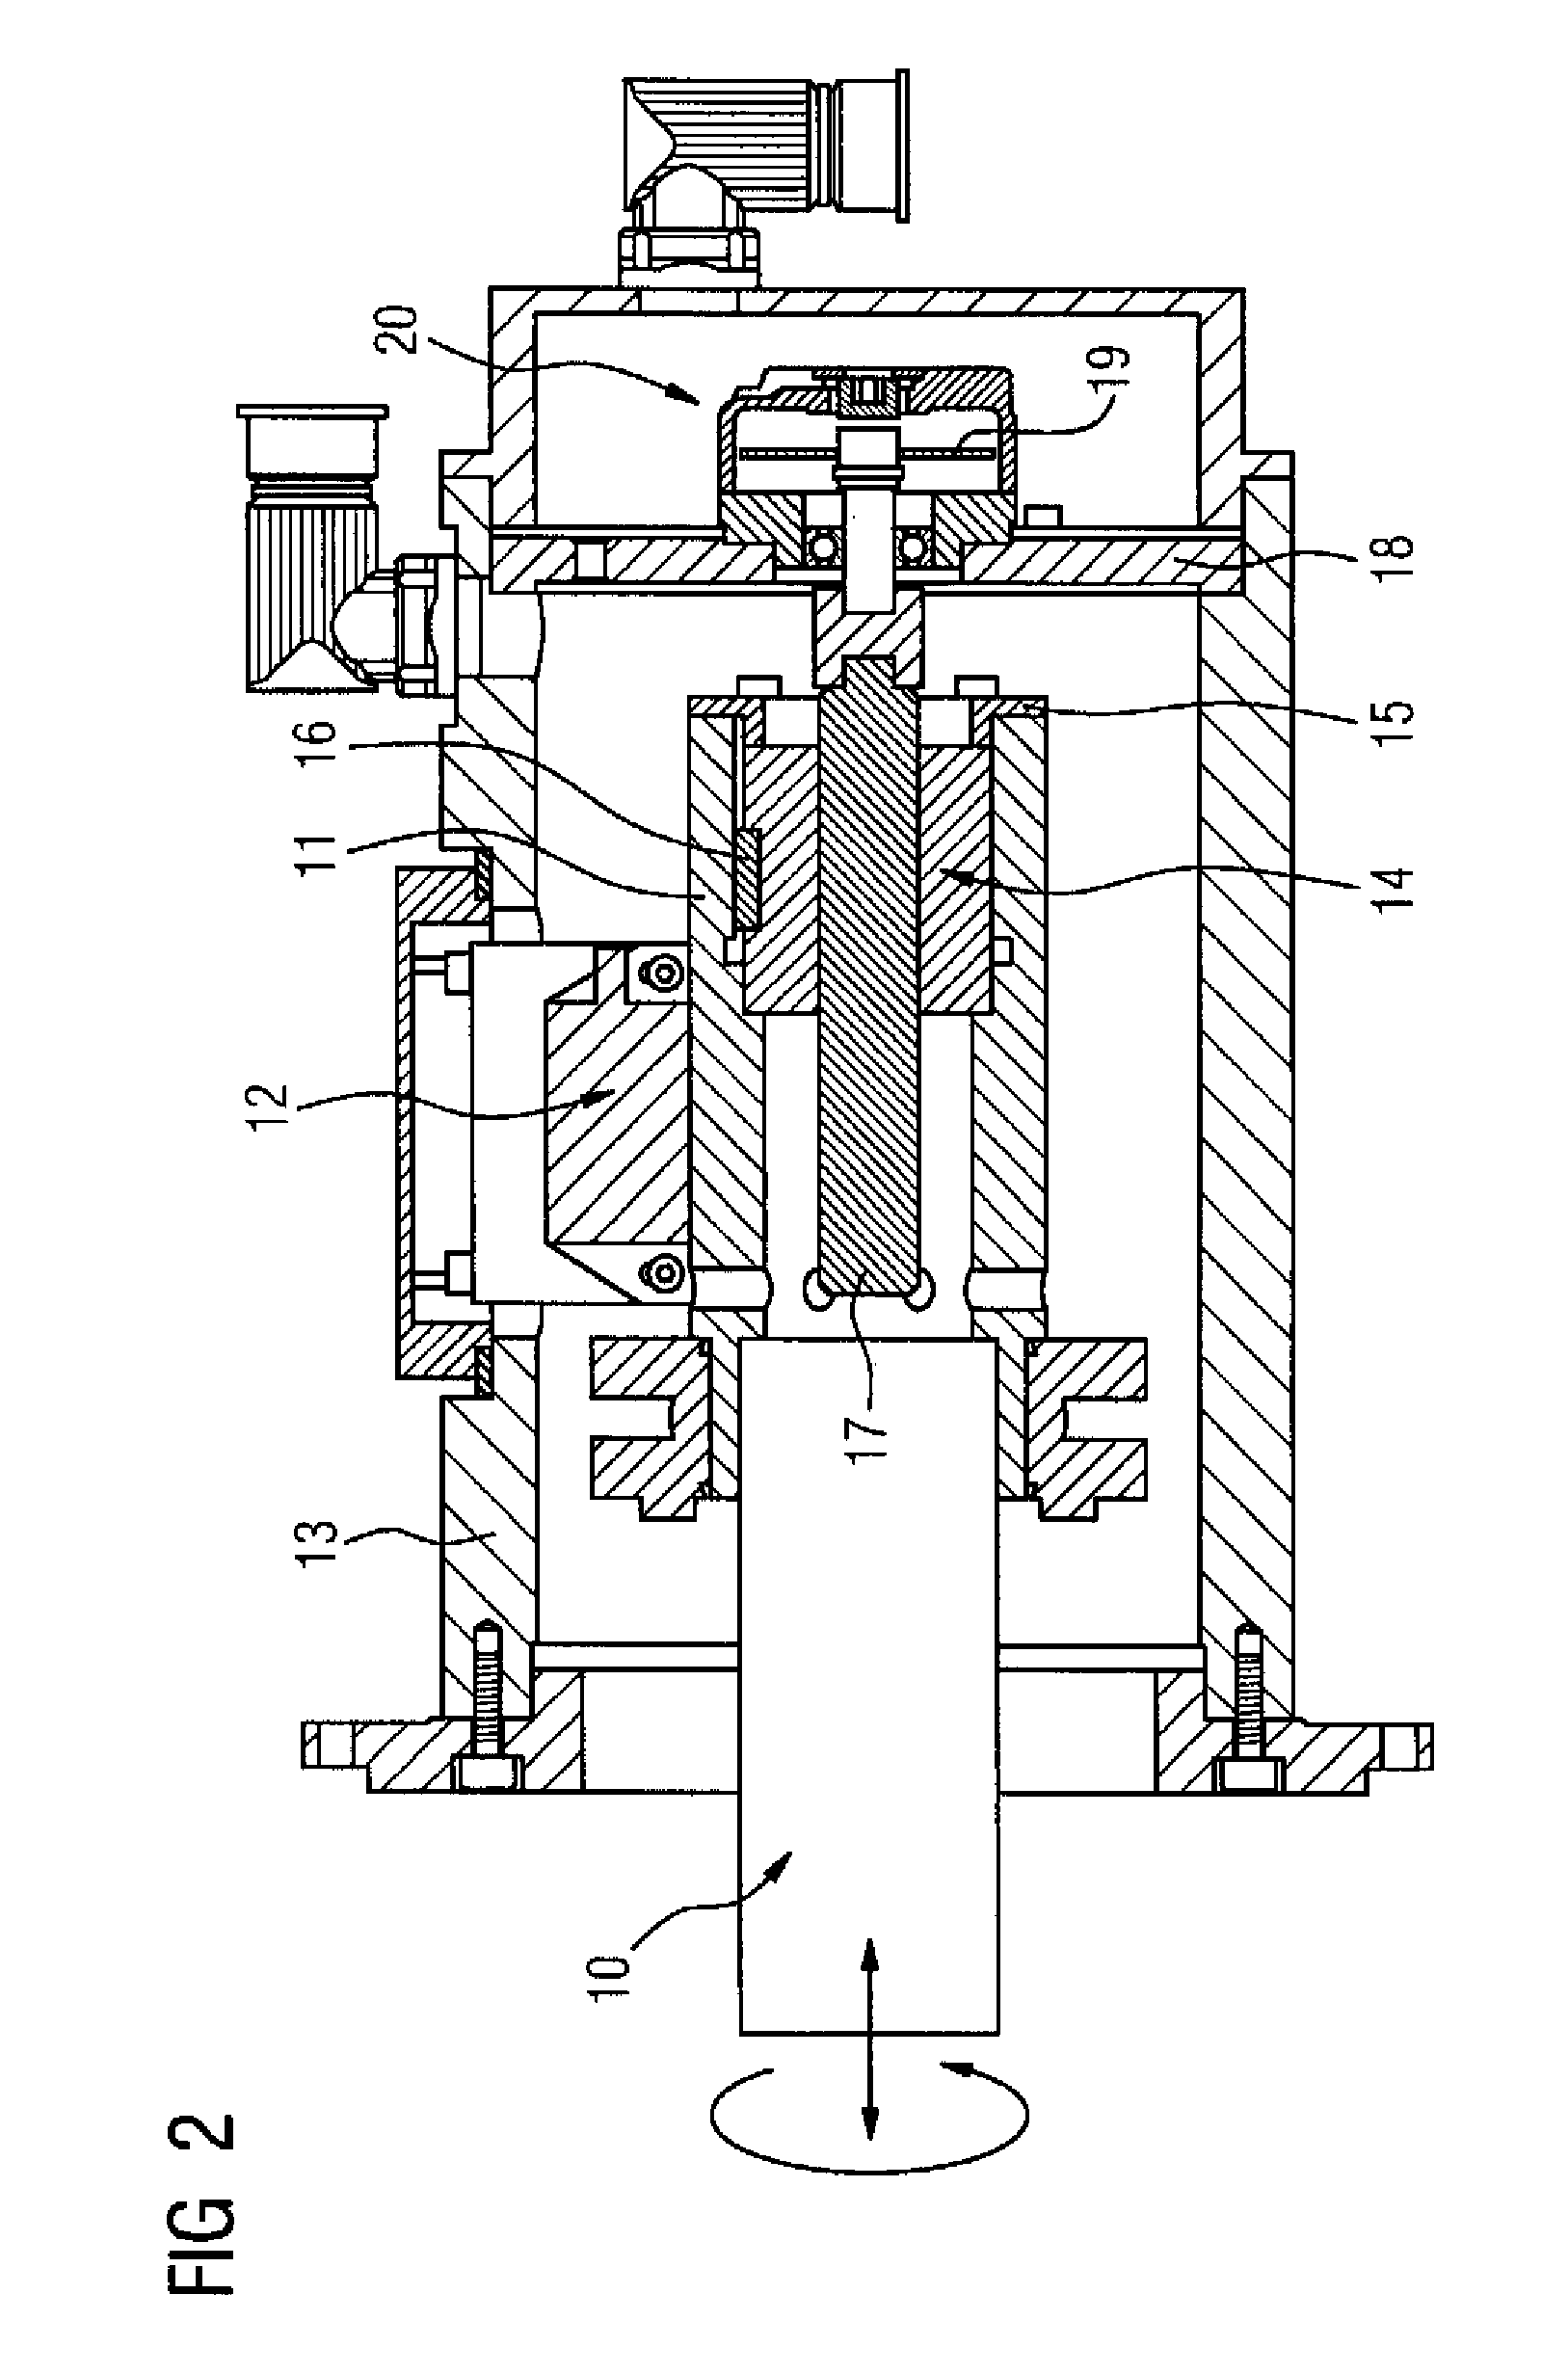 Measuring system for detecting a rotary-linear displacement and corresponding rotary-linear drive